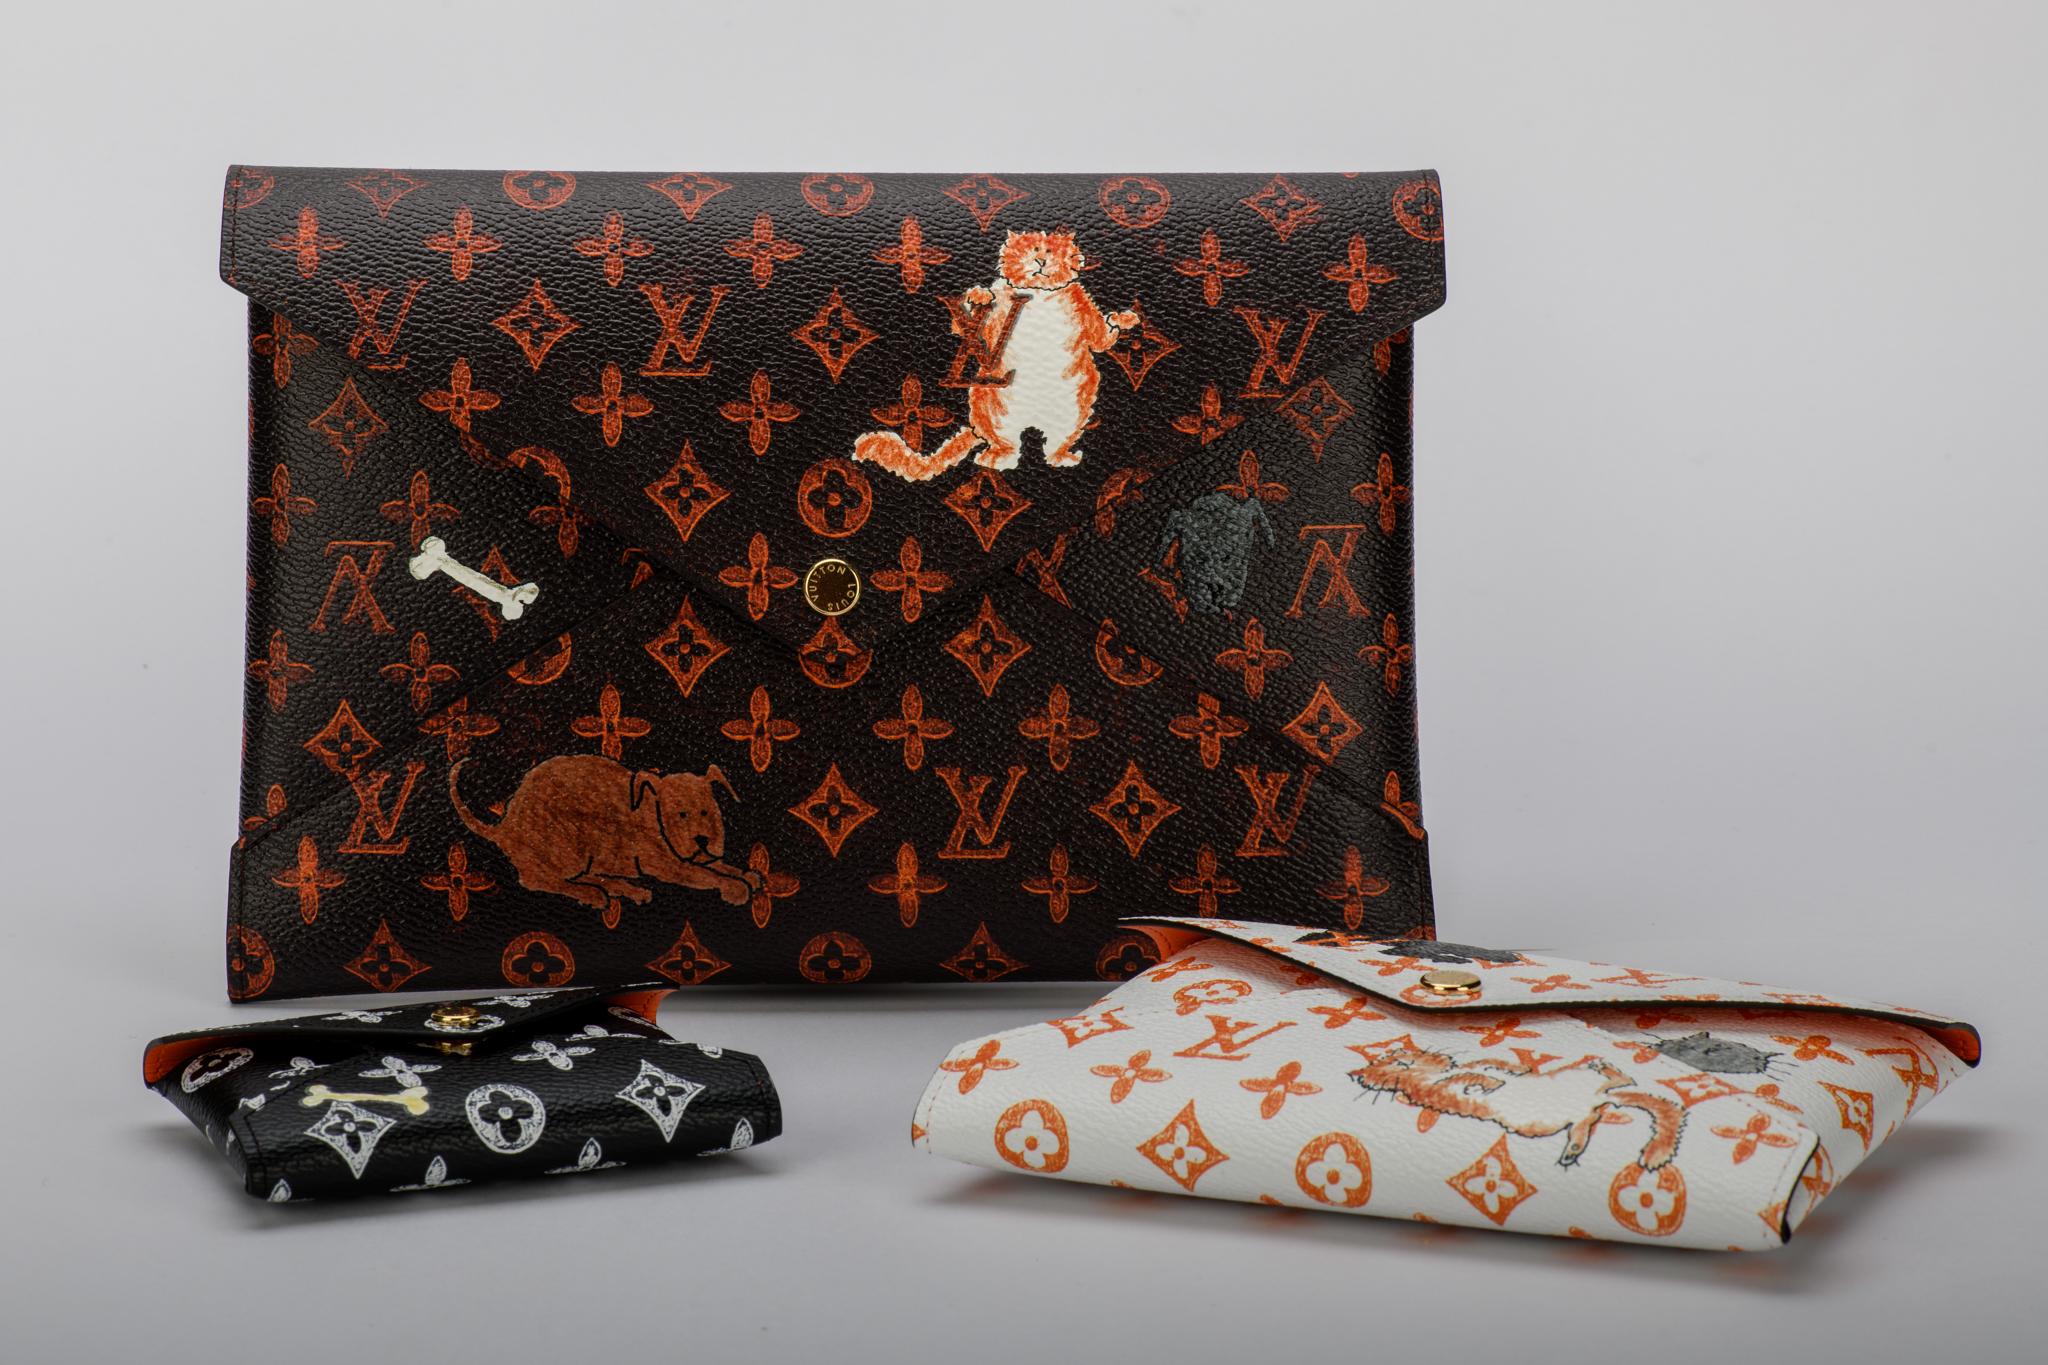 Sold out in stores! New Louis Vuitton Grace Coddington set of three clutches with cats design. Cruise 2019 collection. Comes with booklet, dust cover and box.
